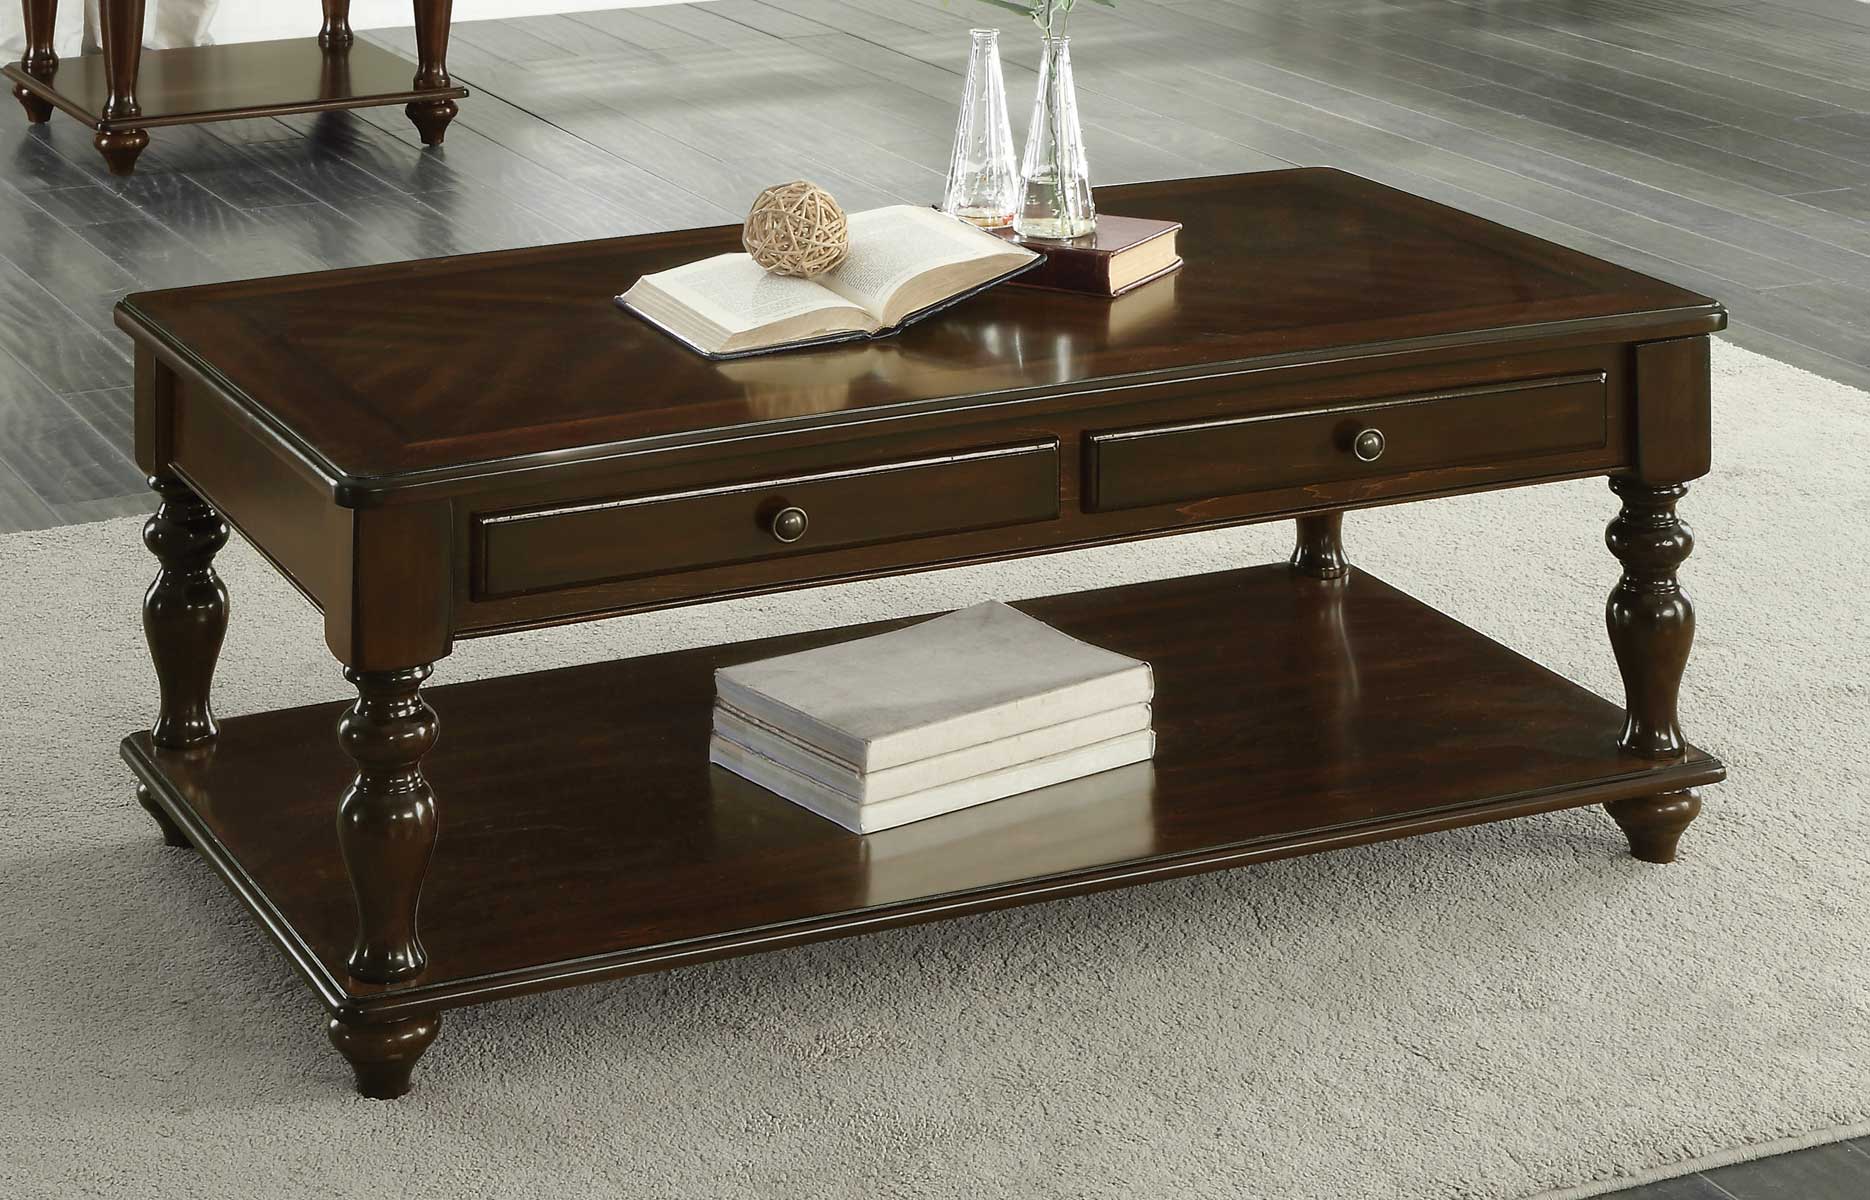 Homelegance Lovington Cocktail Table with Lift Top on Casters - Espresso